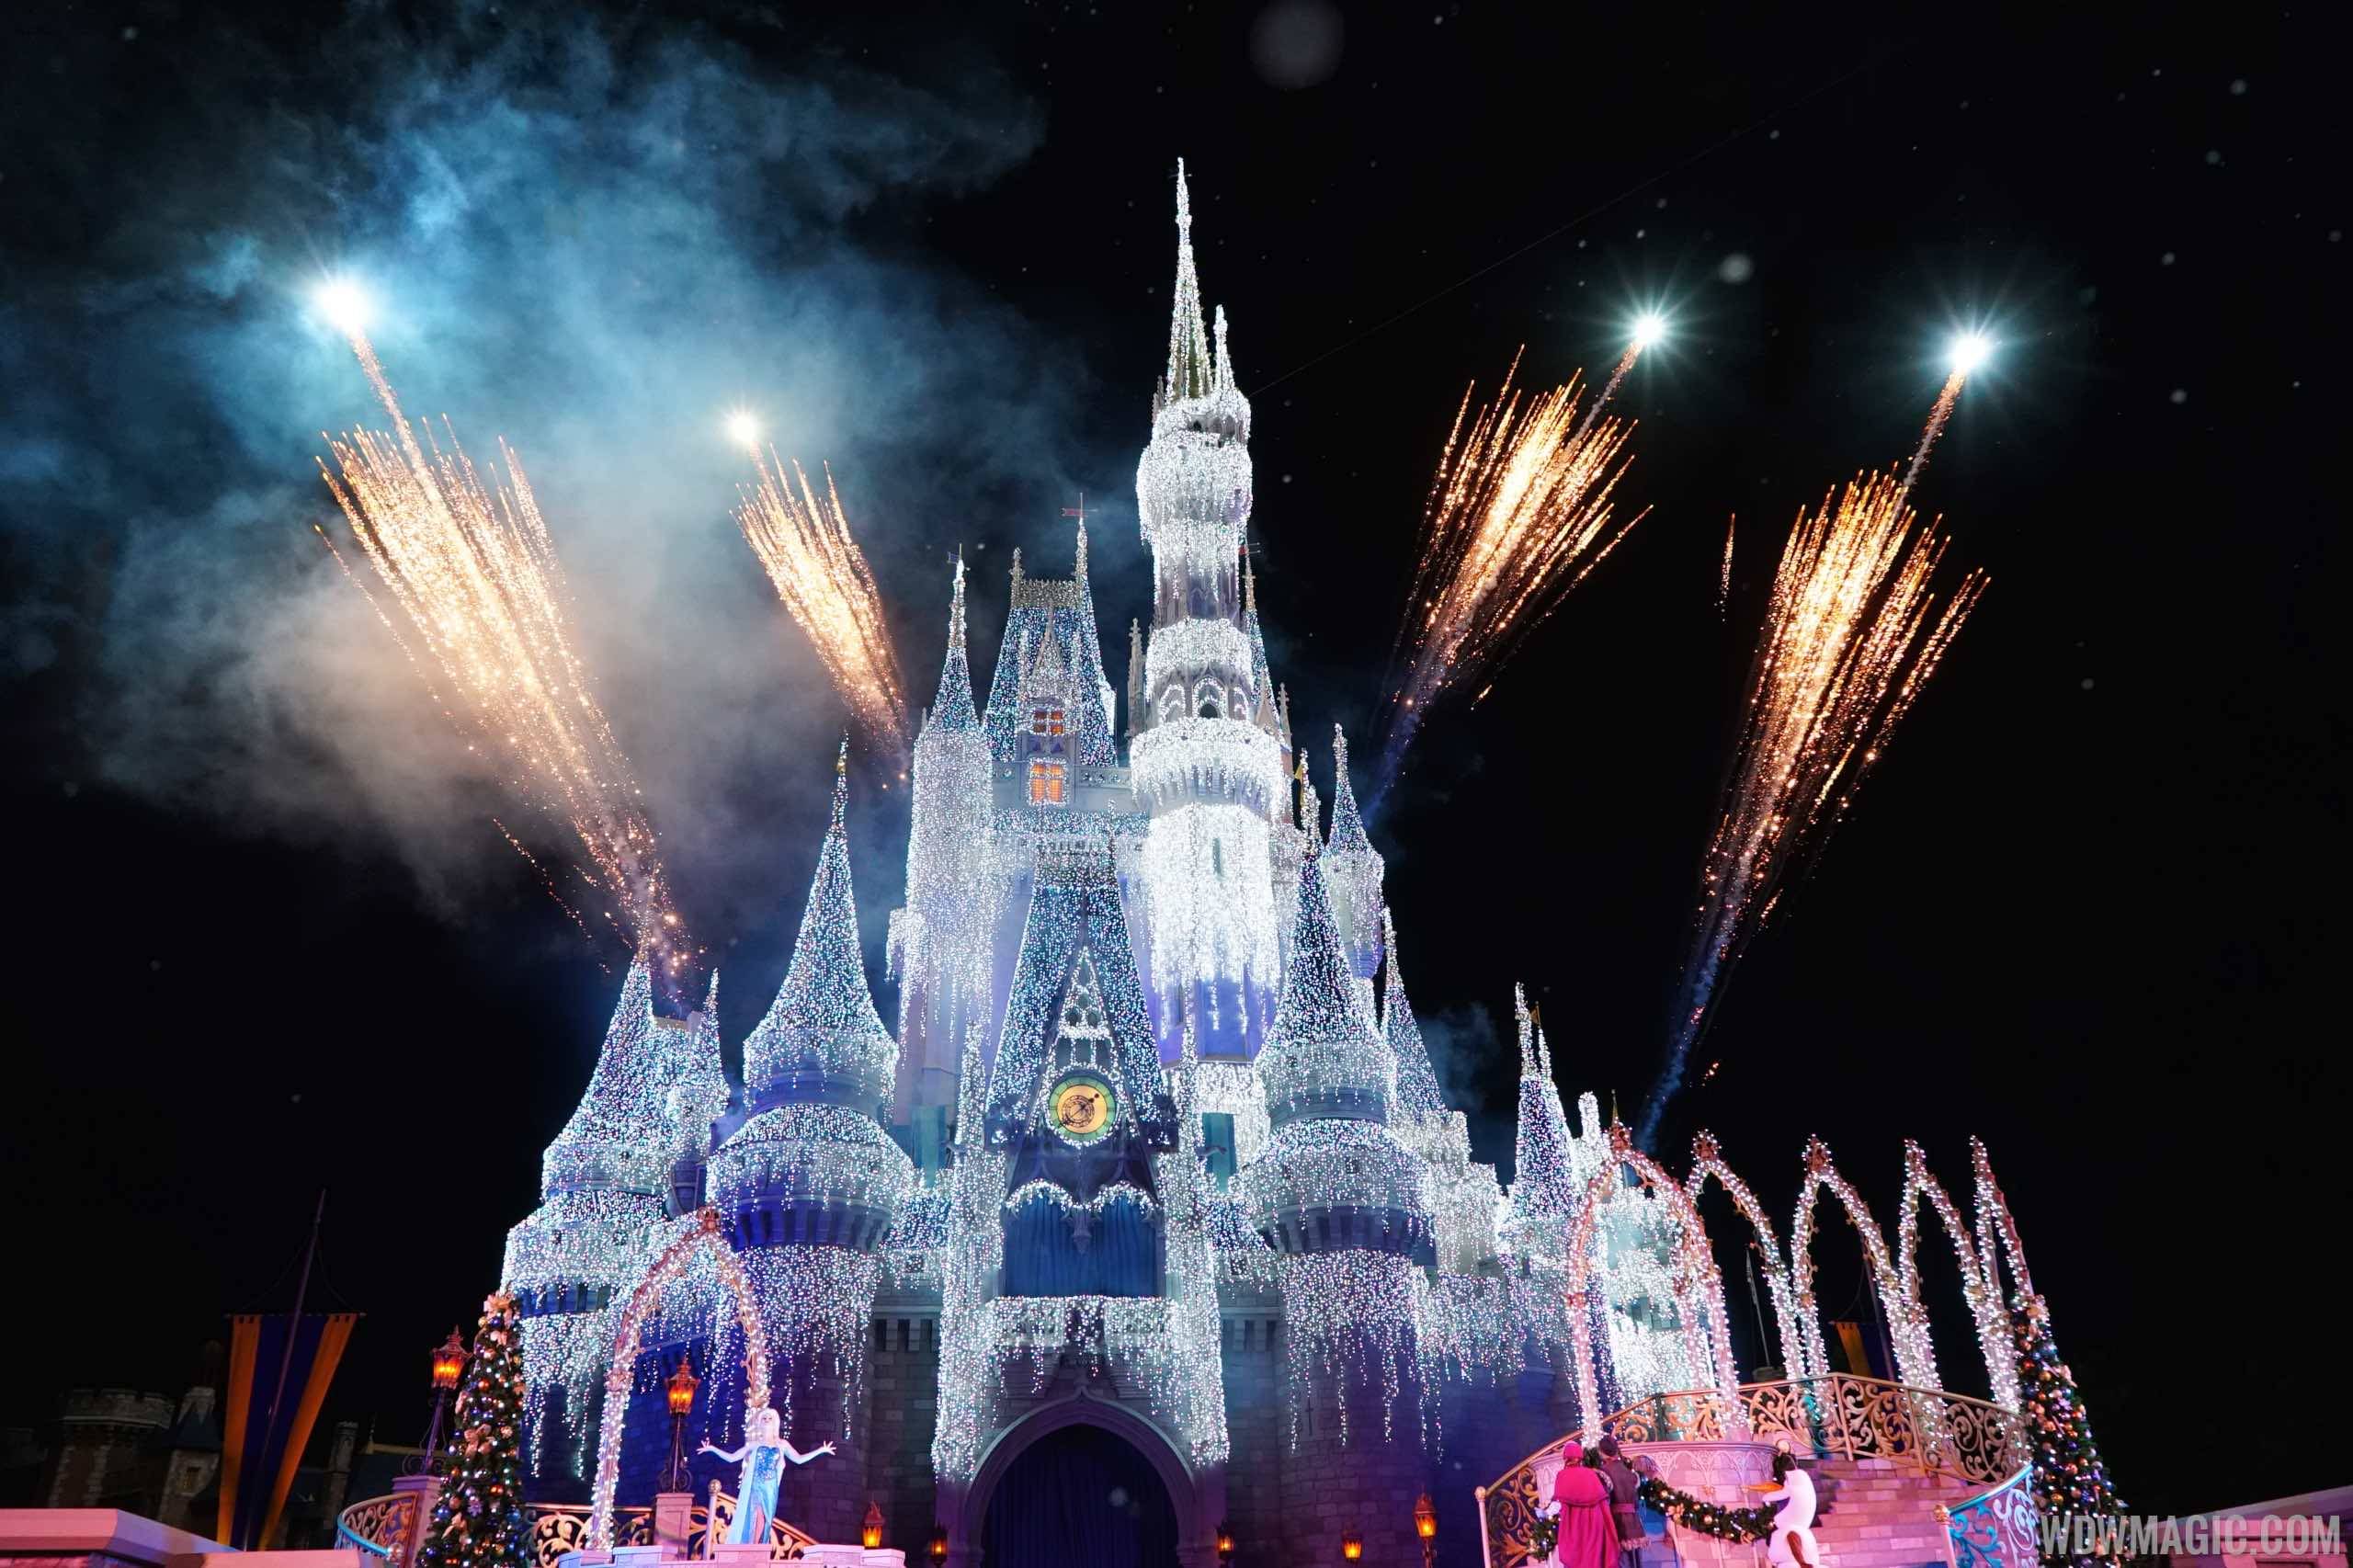 Magic Kingdom expected to miss out on the Cinderella Castle Dreamlights again this year